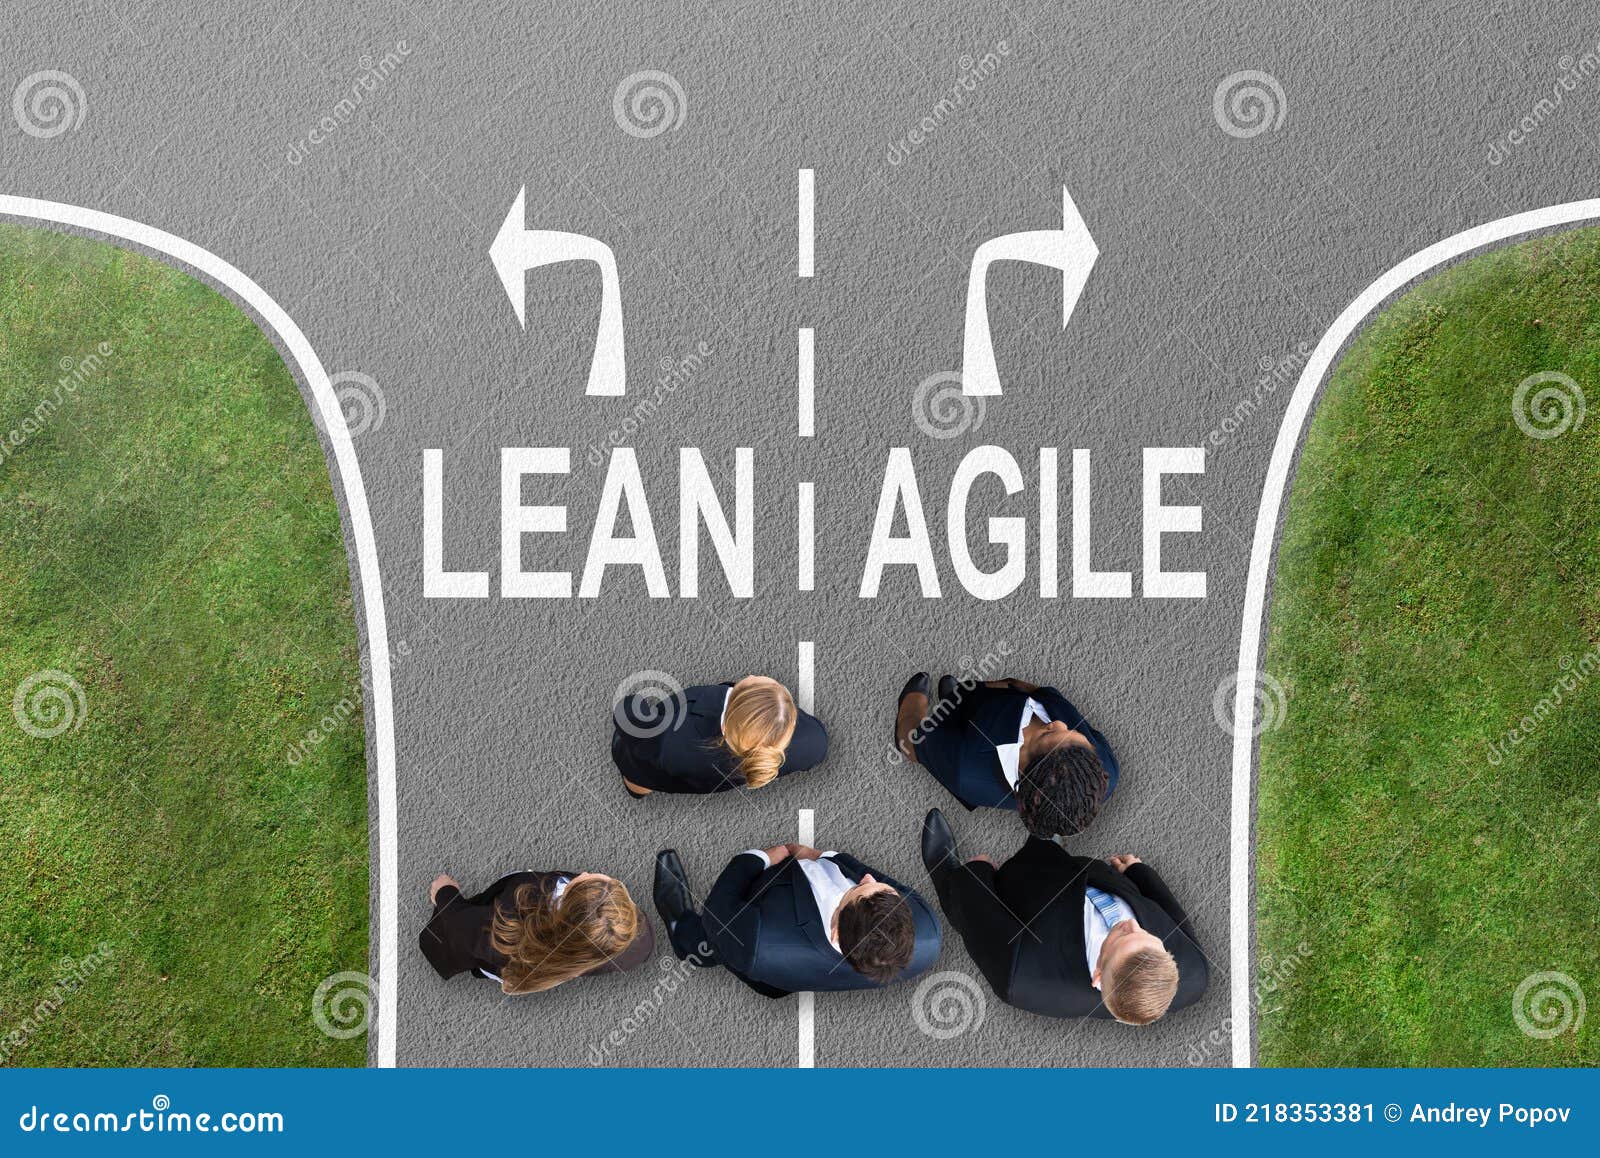 businesspeople standing making lean and agile choice